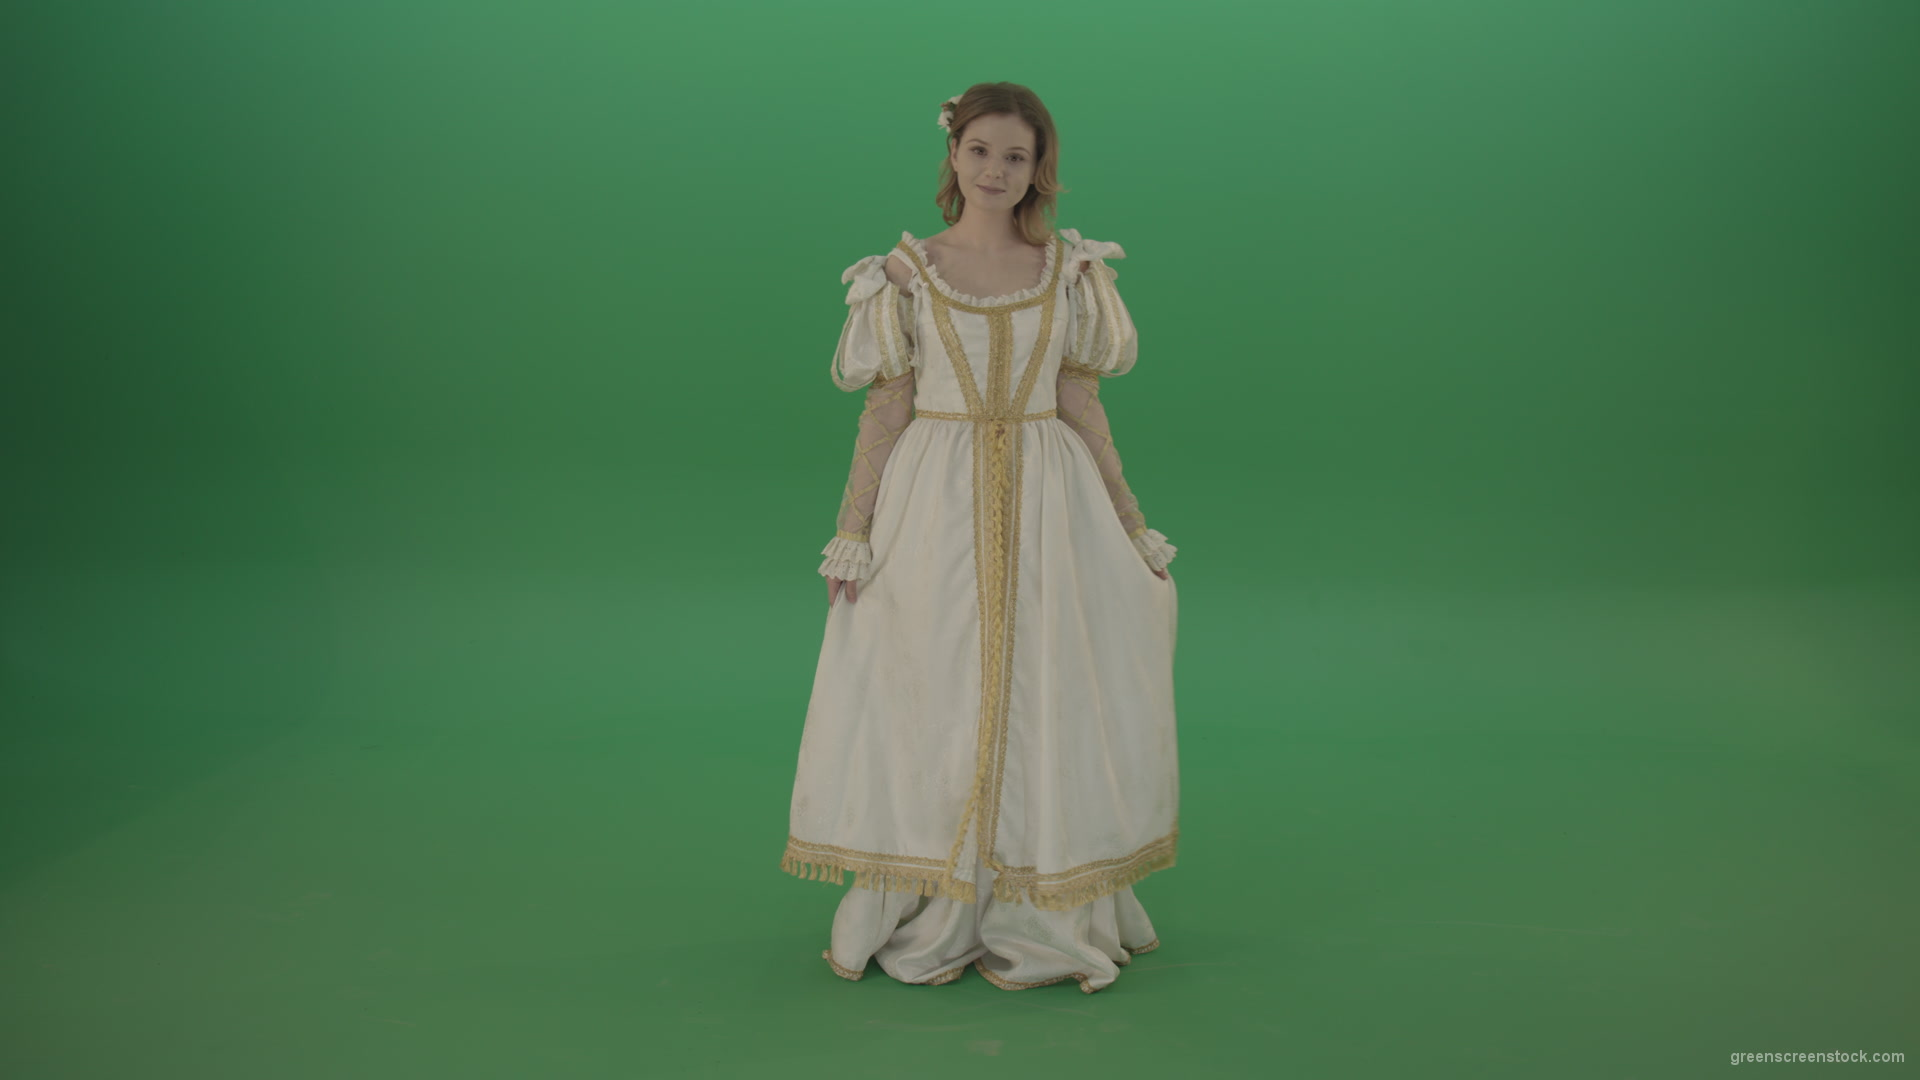 Easy-bowed-girl-is-happy-to-meet-isolated-on-green-screen_008 Green Screen Stock